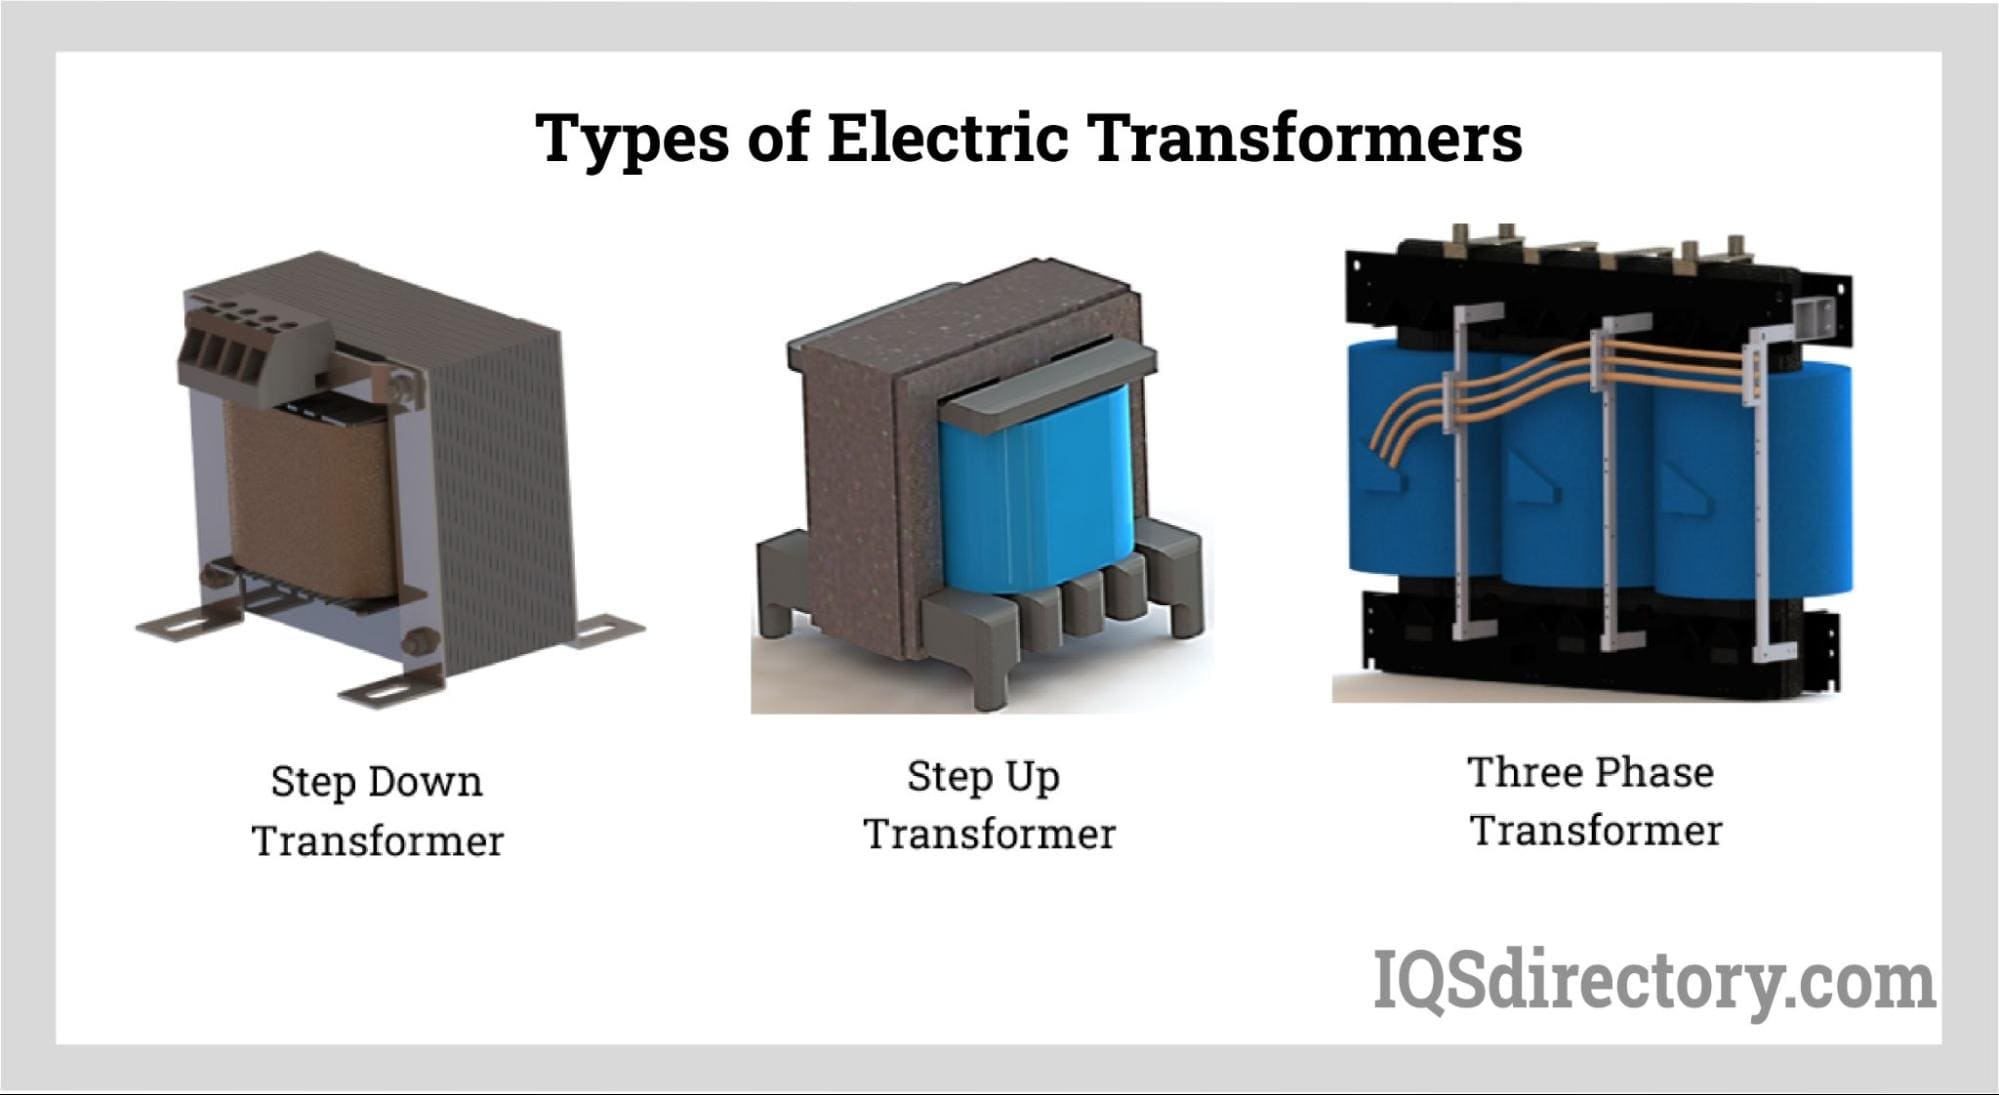 https://www.electrictransformers.net/wp-content/uploads/2023/04/types-of-electric-transformers.jpg